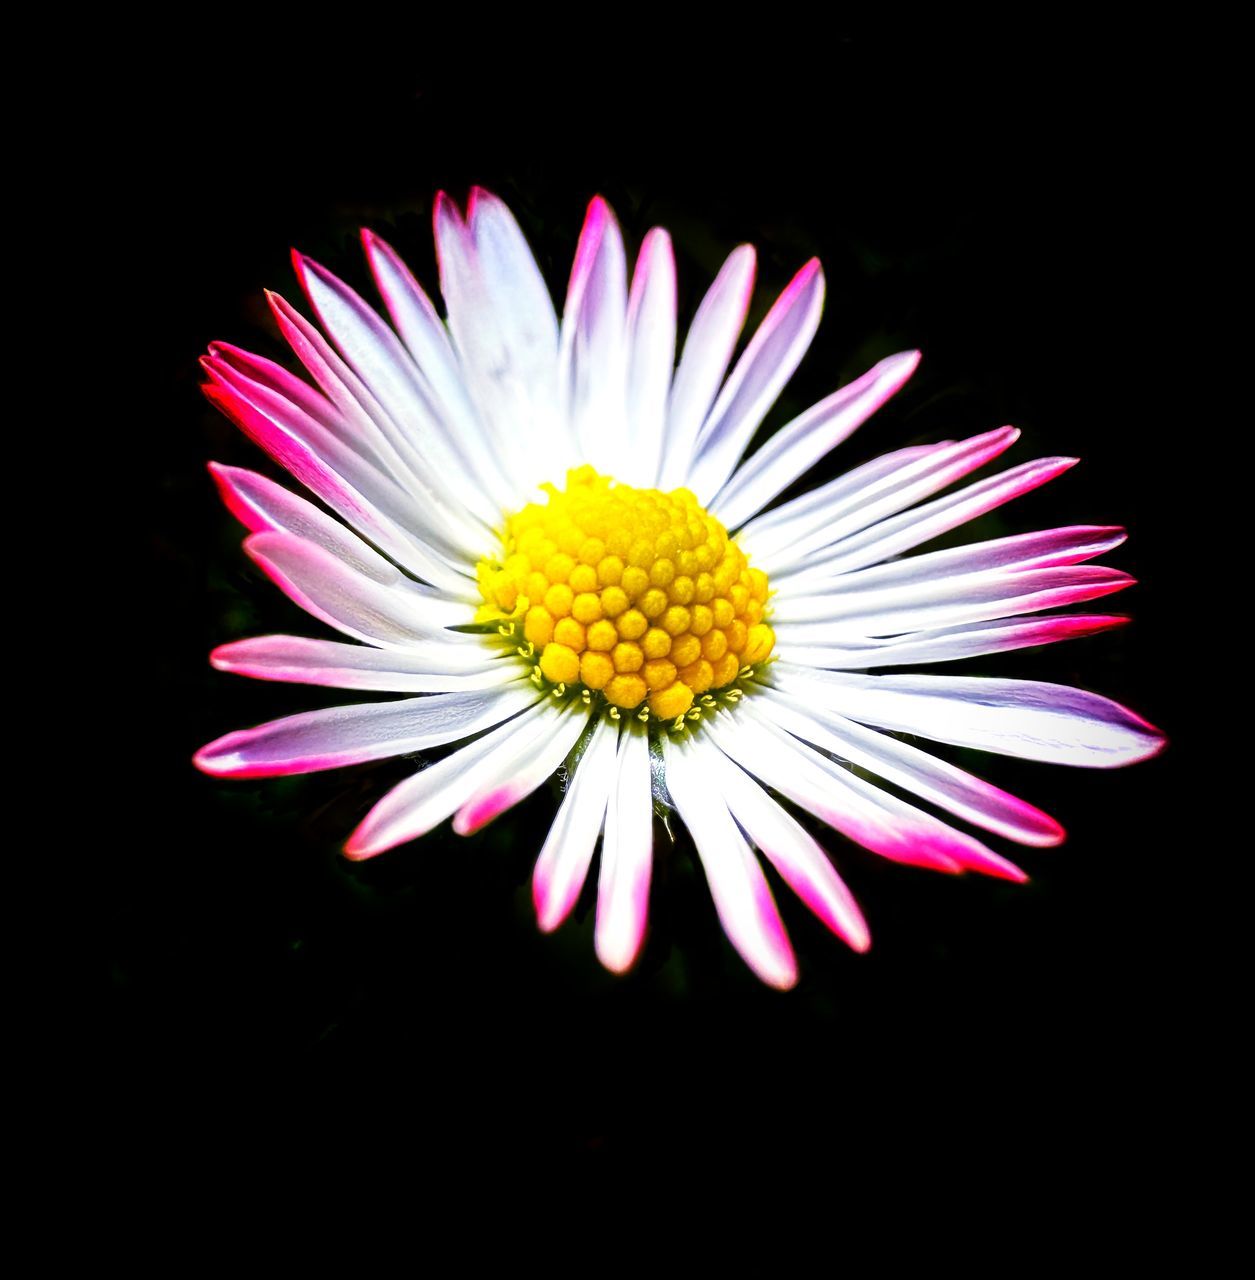 flower, flowering plant, freshness, flower head, petal, black background, inflorescence, plant, beauty in nature, fragility, close-up, studio shot, daisy, yellow, pink, pollen, growth, no people, indoors, nature, macro photography, white, cut out, aster, vibrant color, multi colored